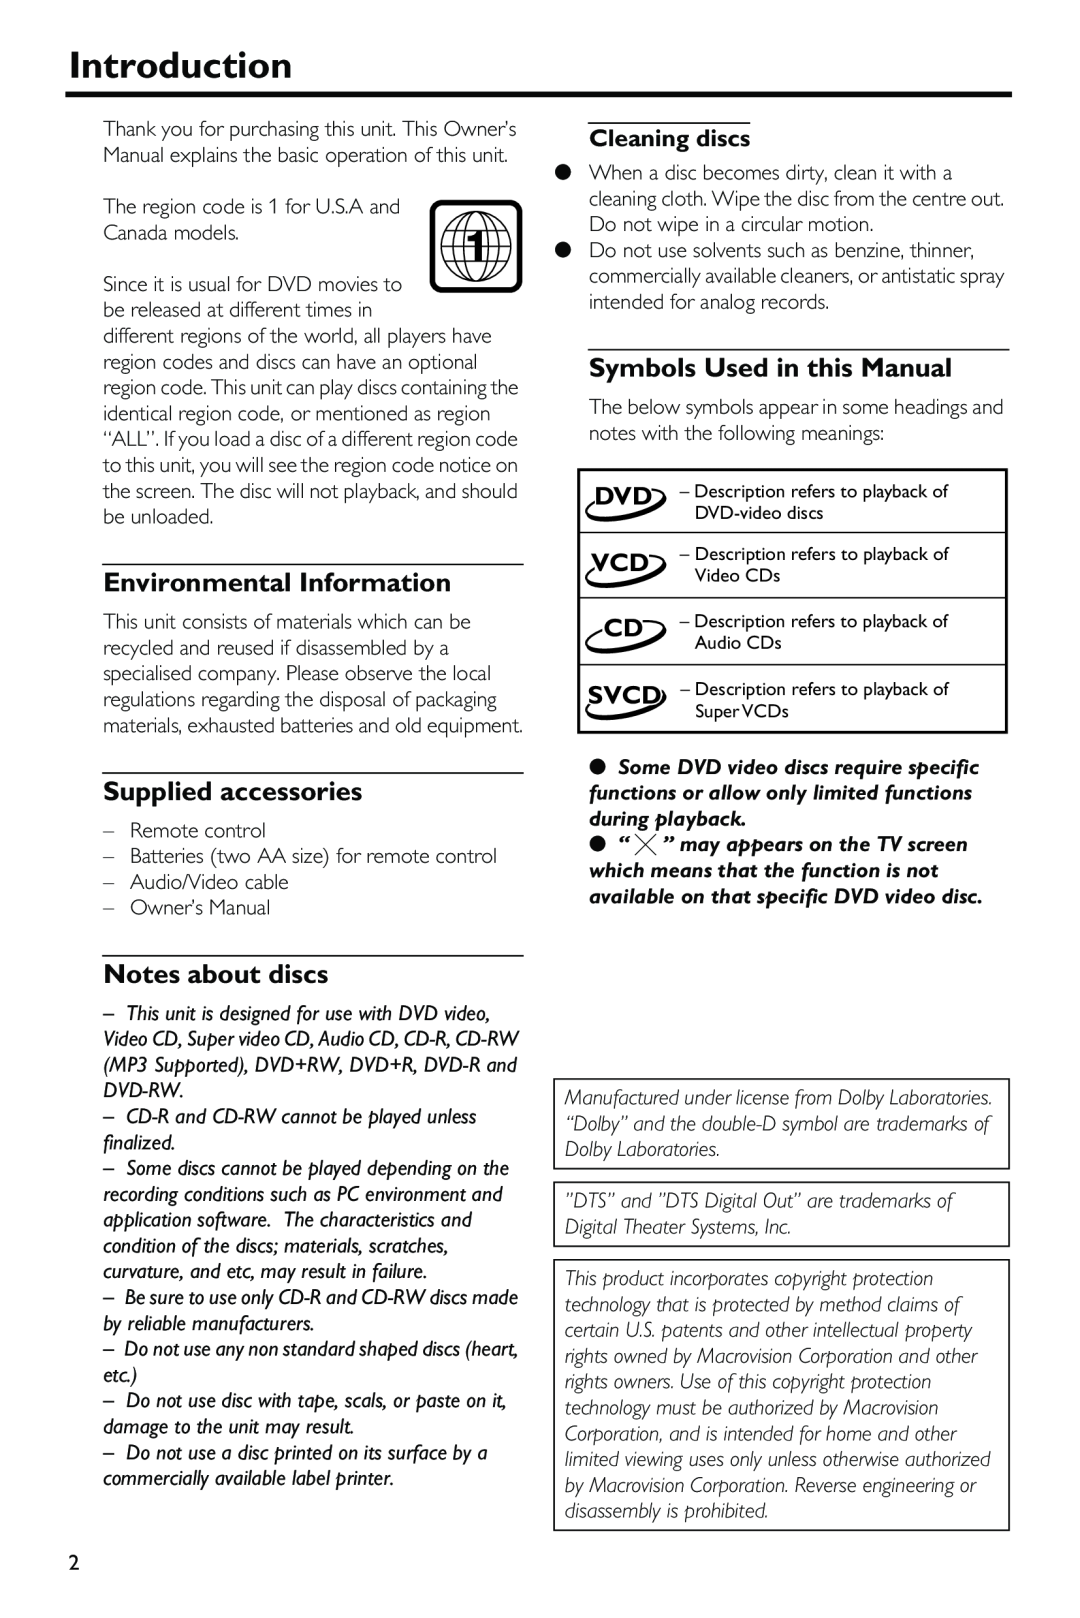 Yamaha DV-S5650 Introduction, Symbols Used in this Manual, Environmental Information, Supplied accessories, Svcd, Dvd-Rw 